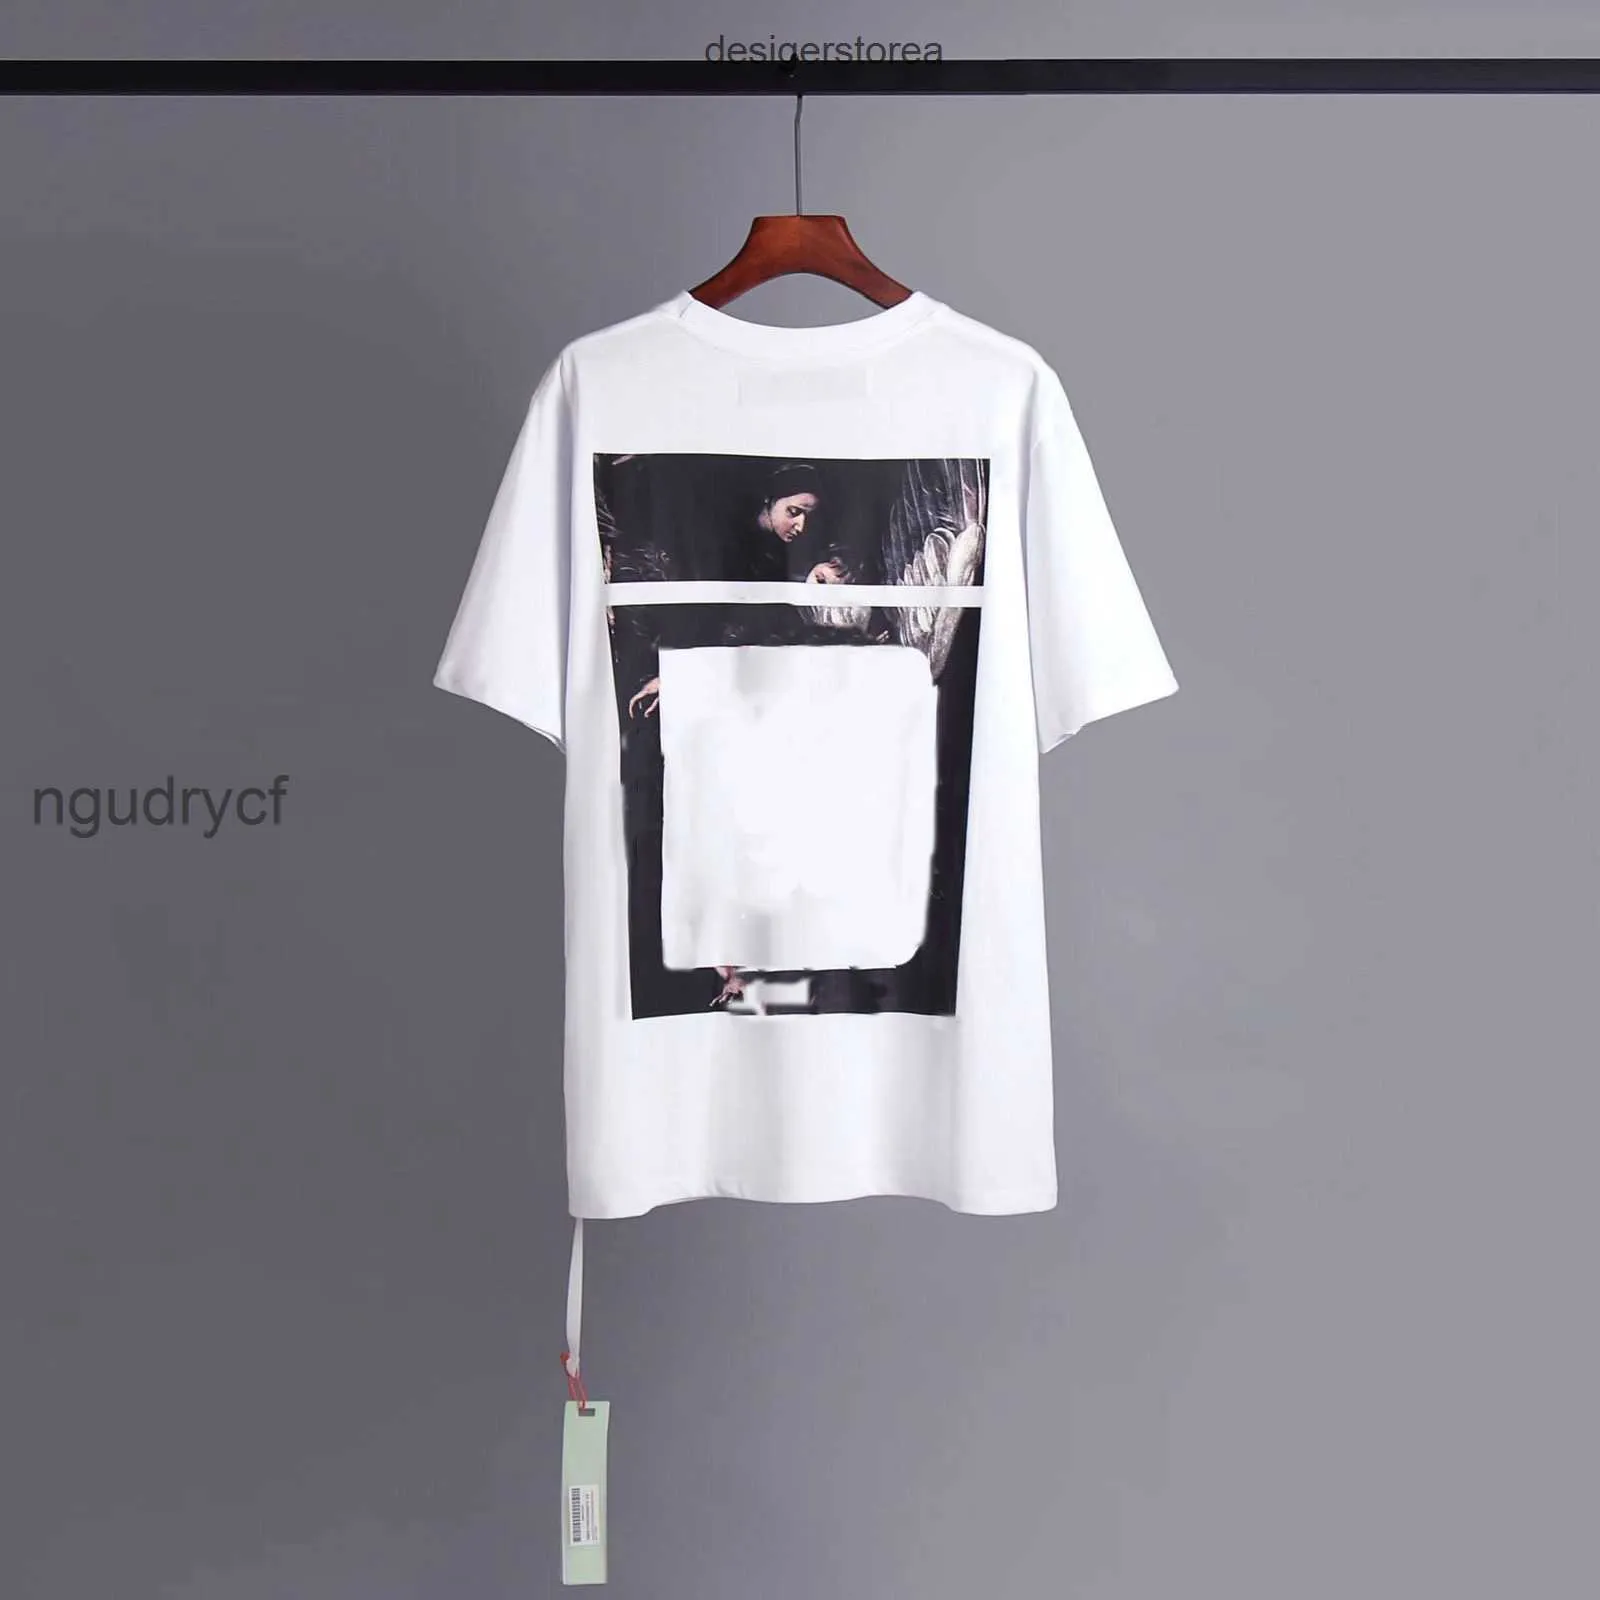 Heren T-shirts T-shirt Heren Dames Ontwerpers Losse T-shirts Man Casual Luxe Kleding Street chic Korte mouwen Polo's T-shirts Maat Offes WhiteJ1CC